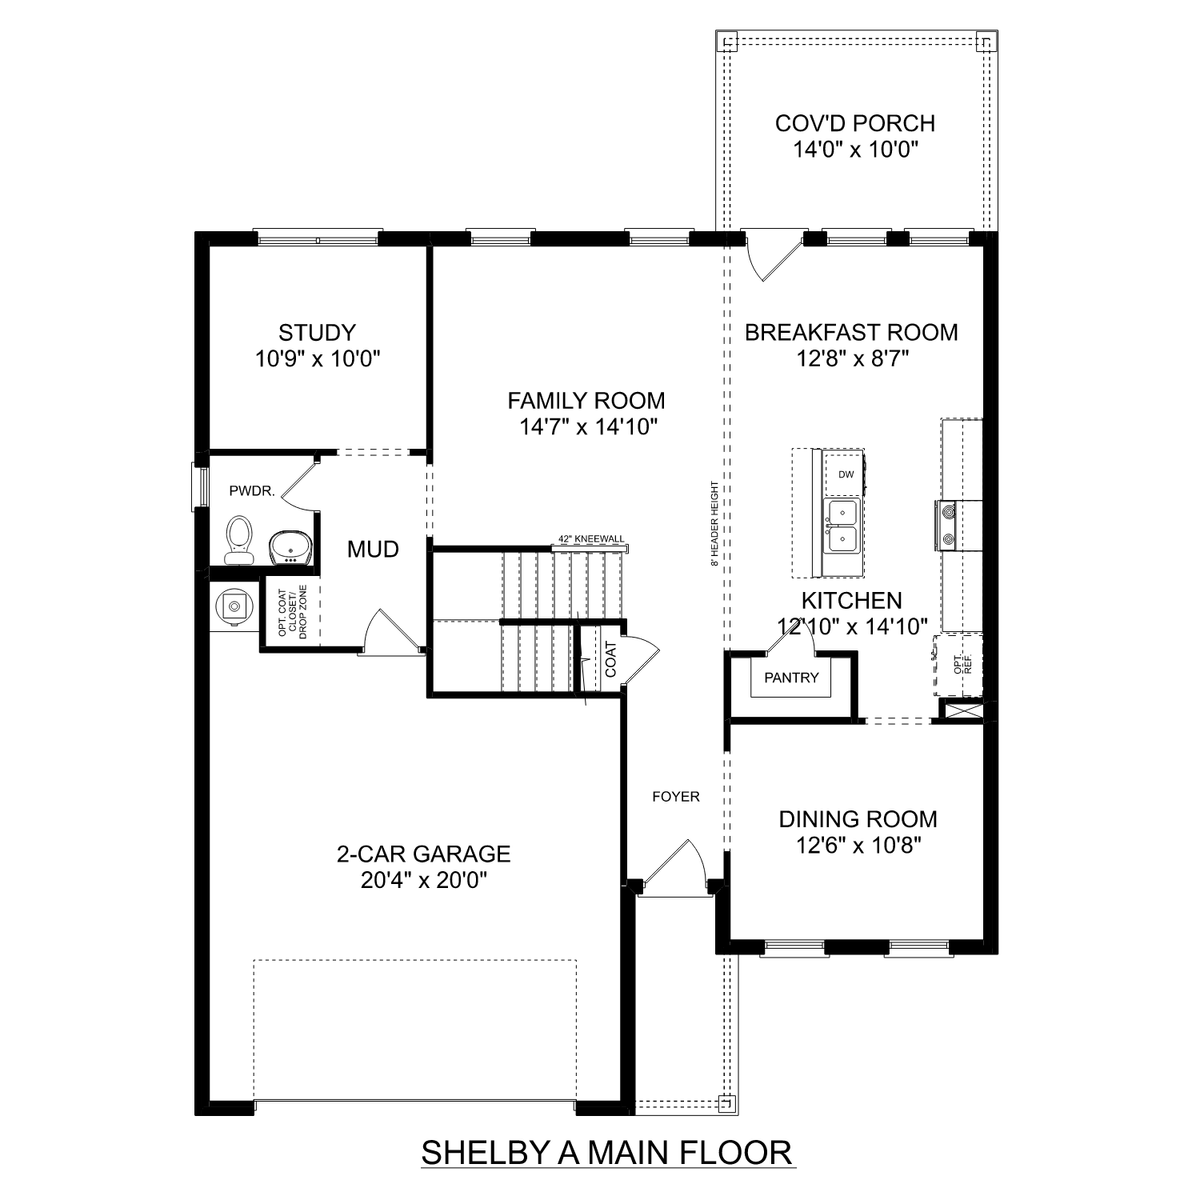 1 - The Shelby A buildable floor plan layout in Davidson Homes' Old Stone community.